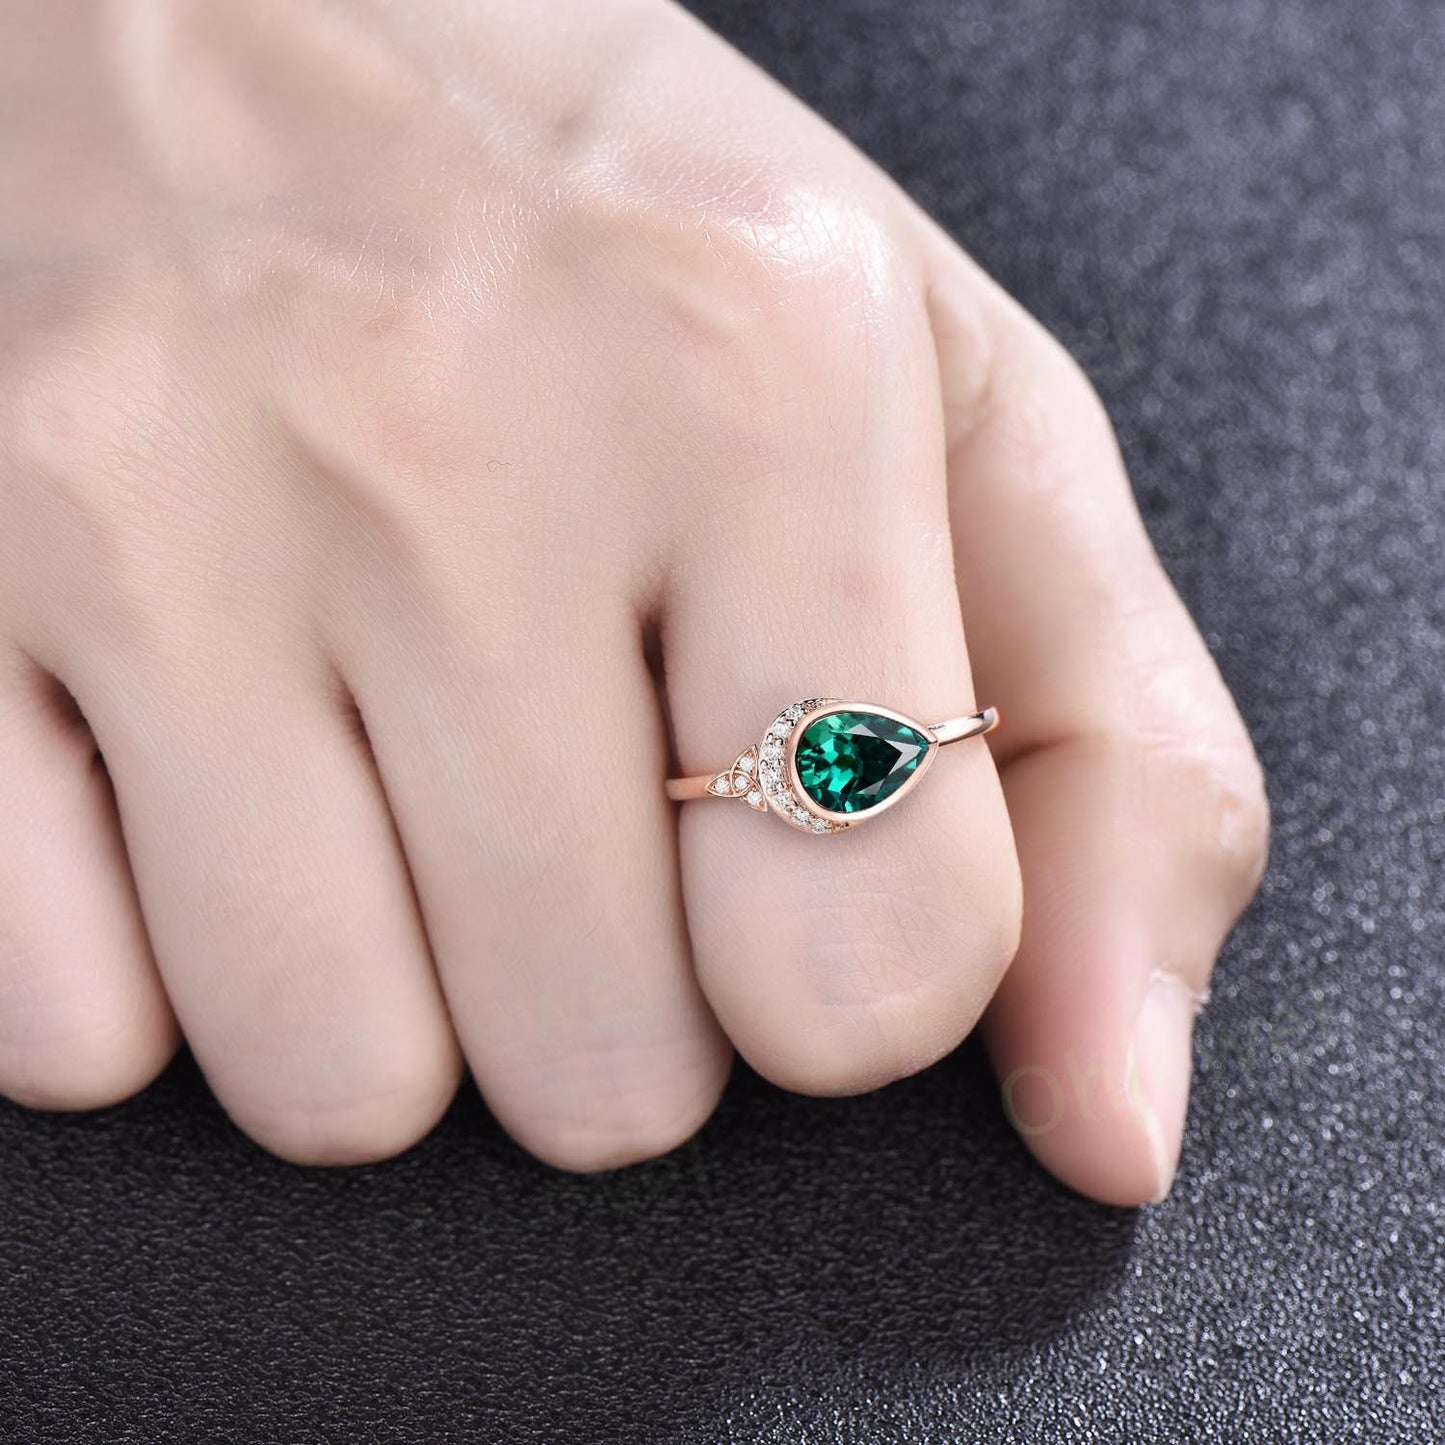 Pear shaped green emerald ring vintage moon bezel unique engagement ring women yellow gold celtic knot diamond anniversary ring gift